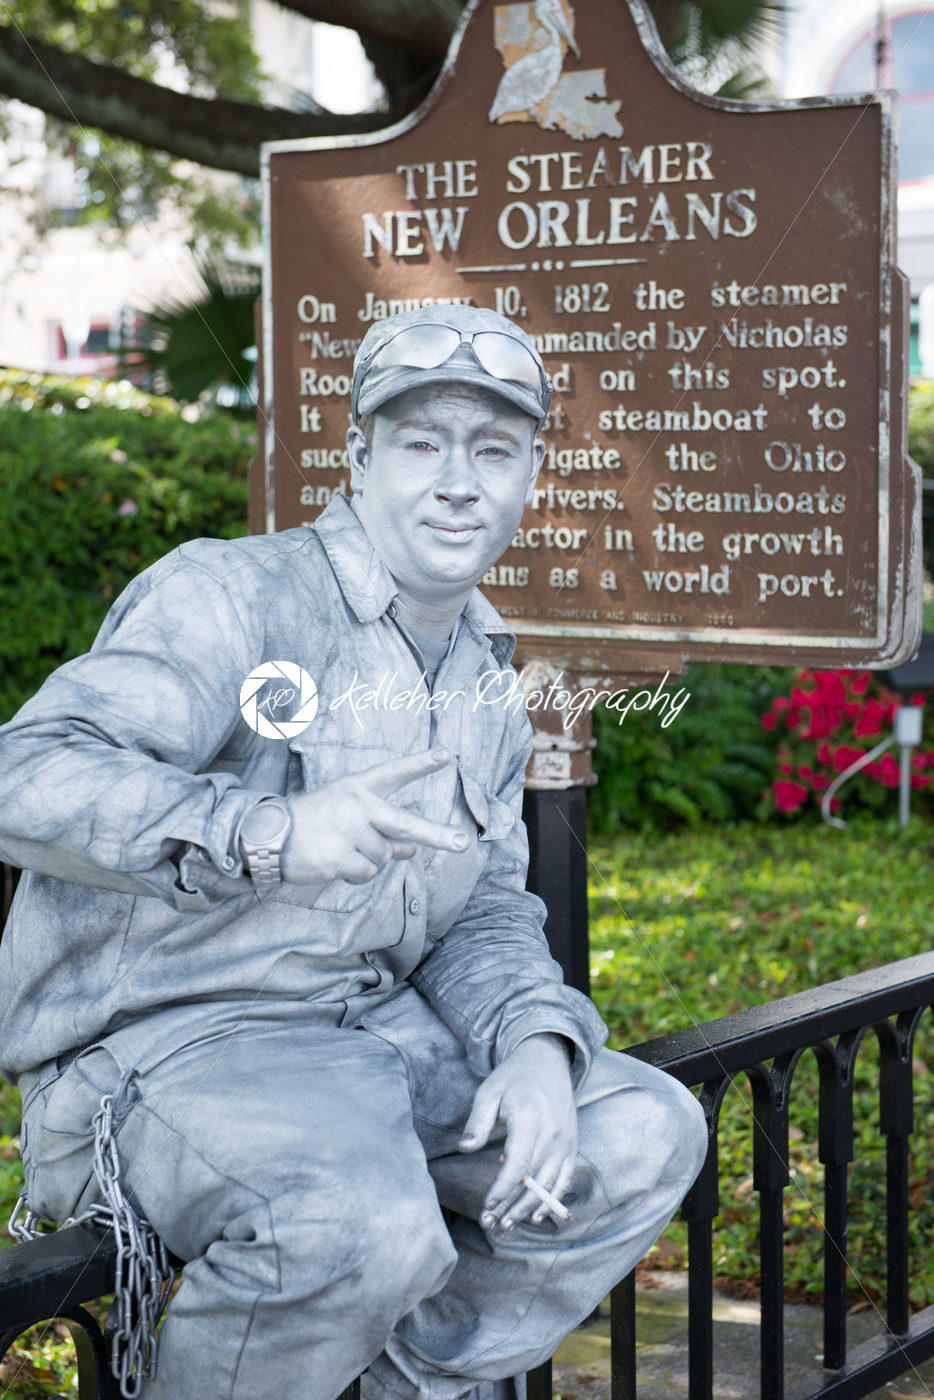 NEW ORLEANS, LA – APRIL 13: Street actor dressed up as a tin man in front of the Steamer historical sign on April 13, 2014 - Kelleher Photography Store